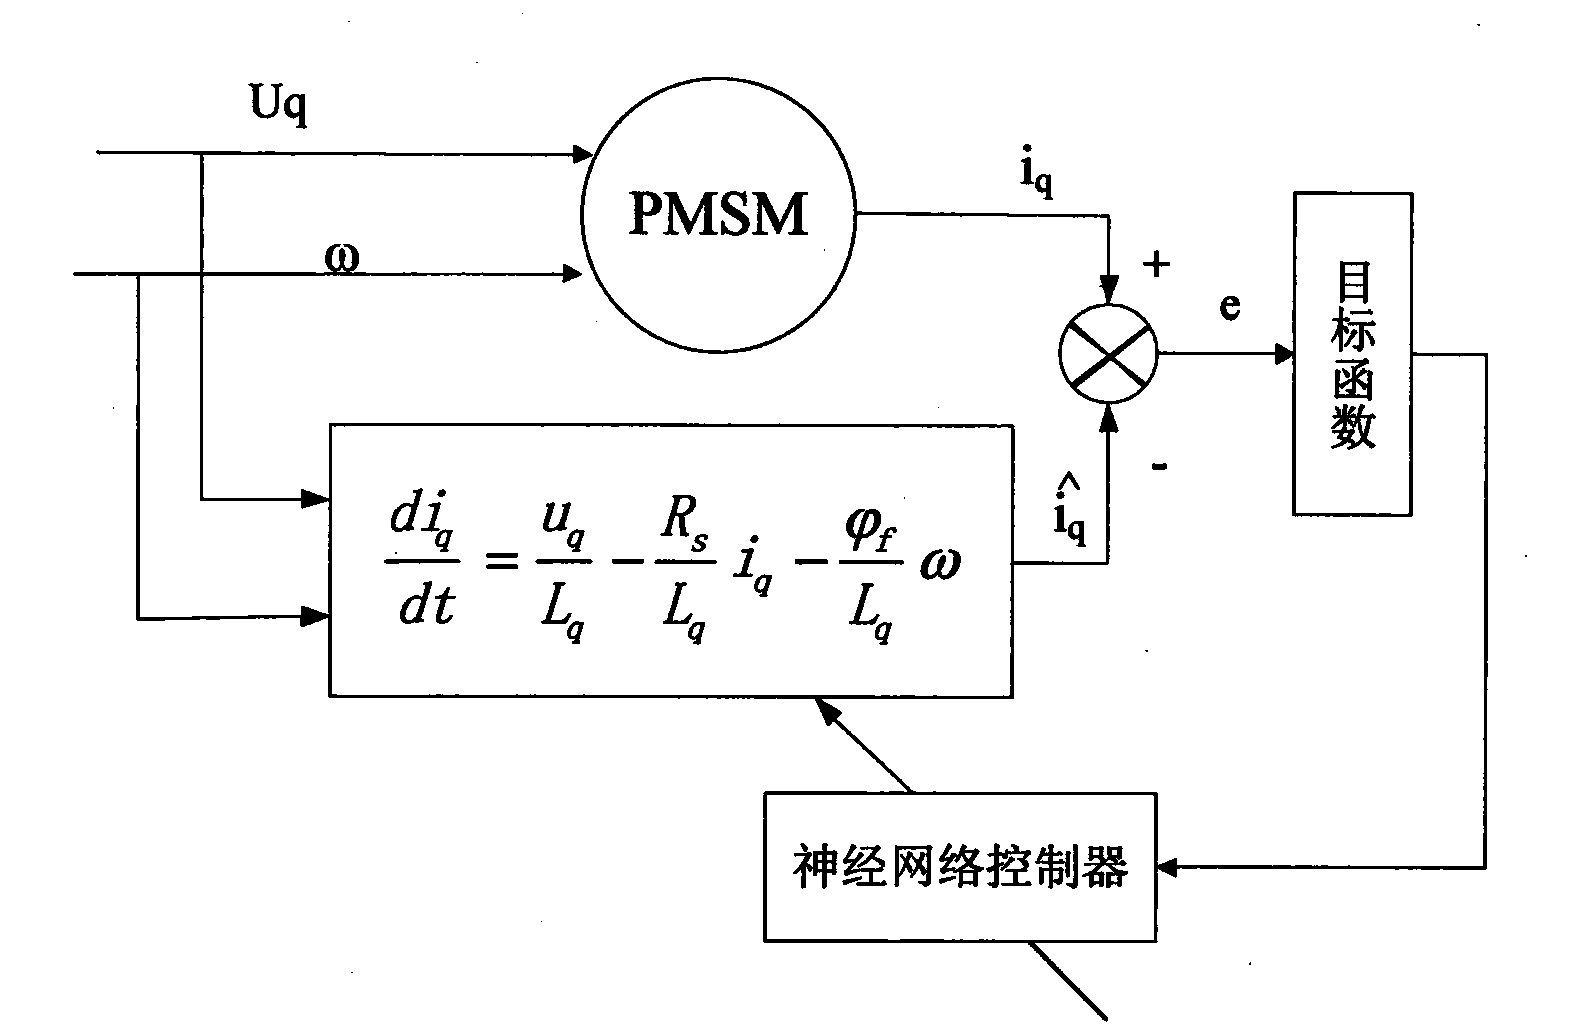 Permanent magnet synchronous motor parameter identification method based on artificial neural network